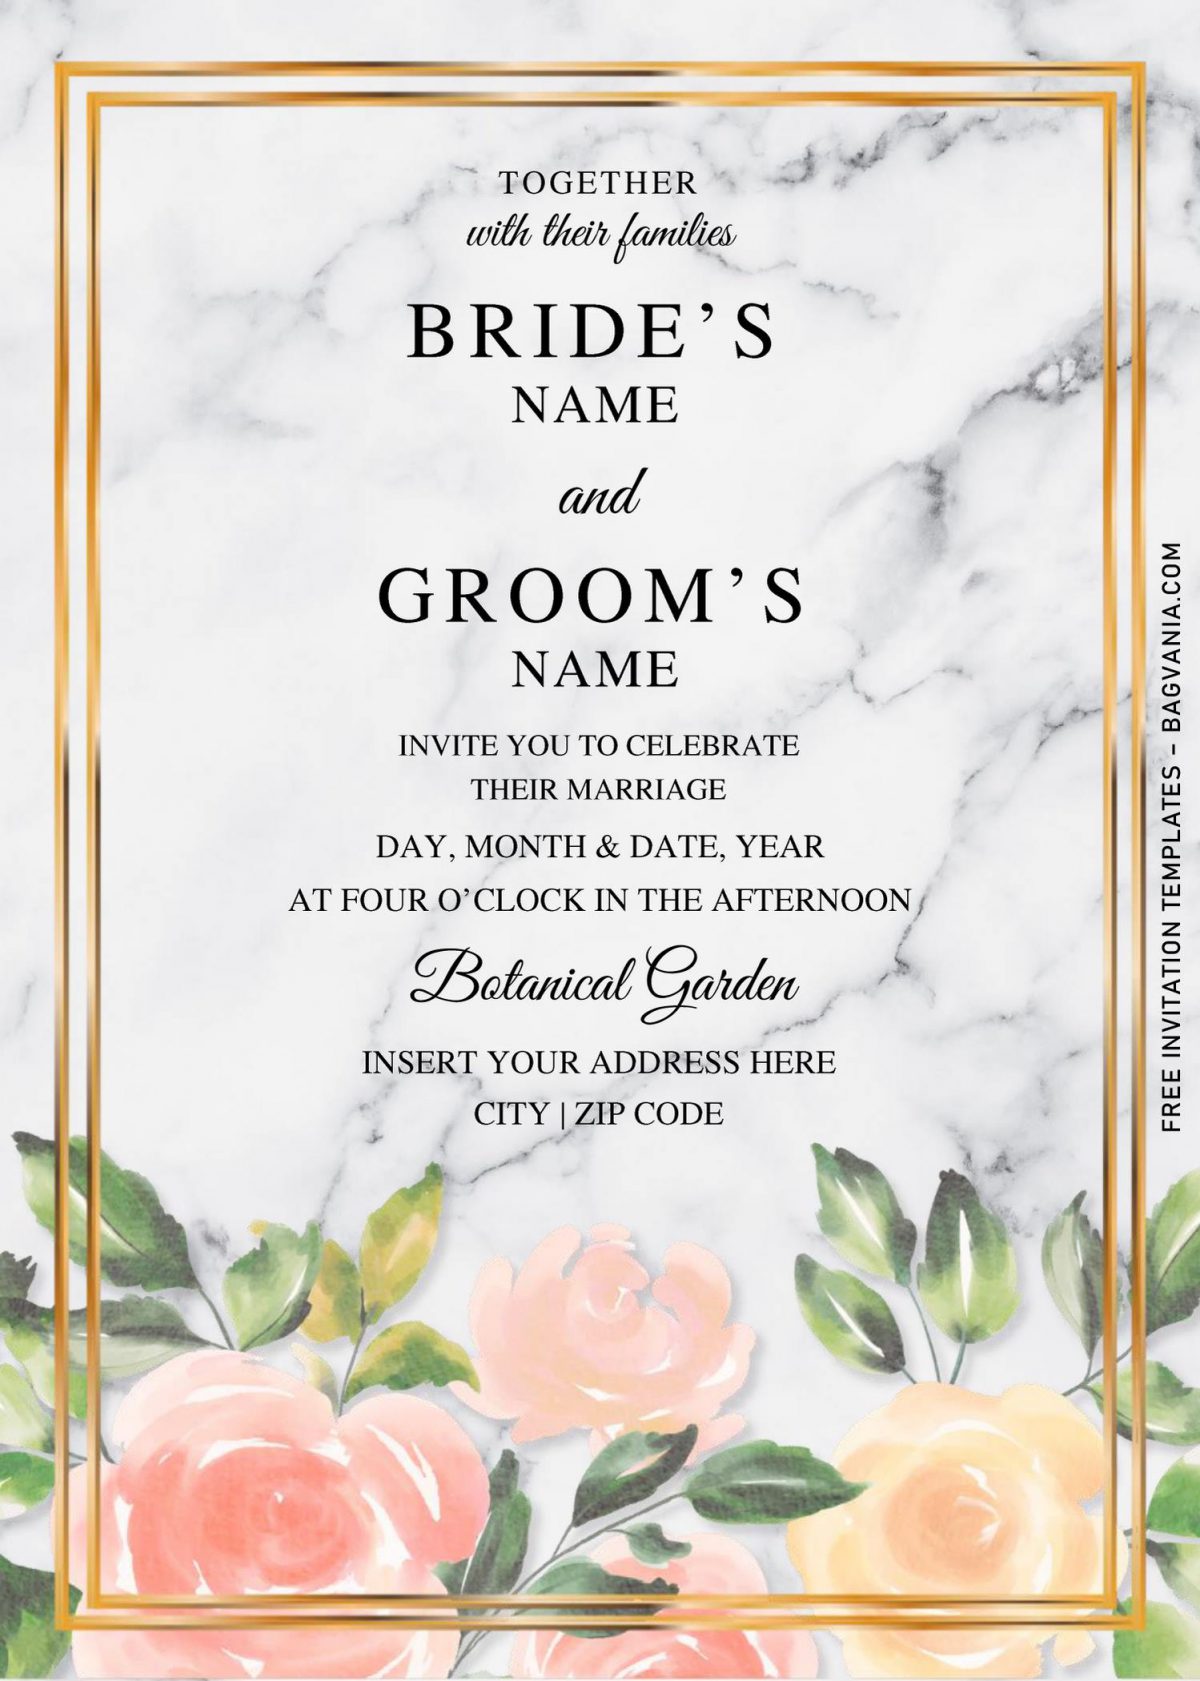 Free Peach Flower Wedding Invitation Templates For Word and has metallic gold frame